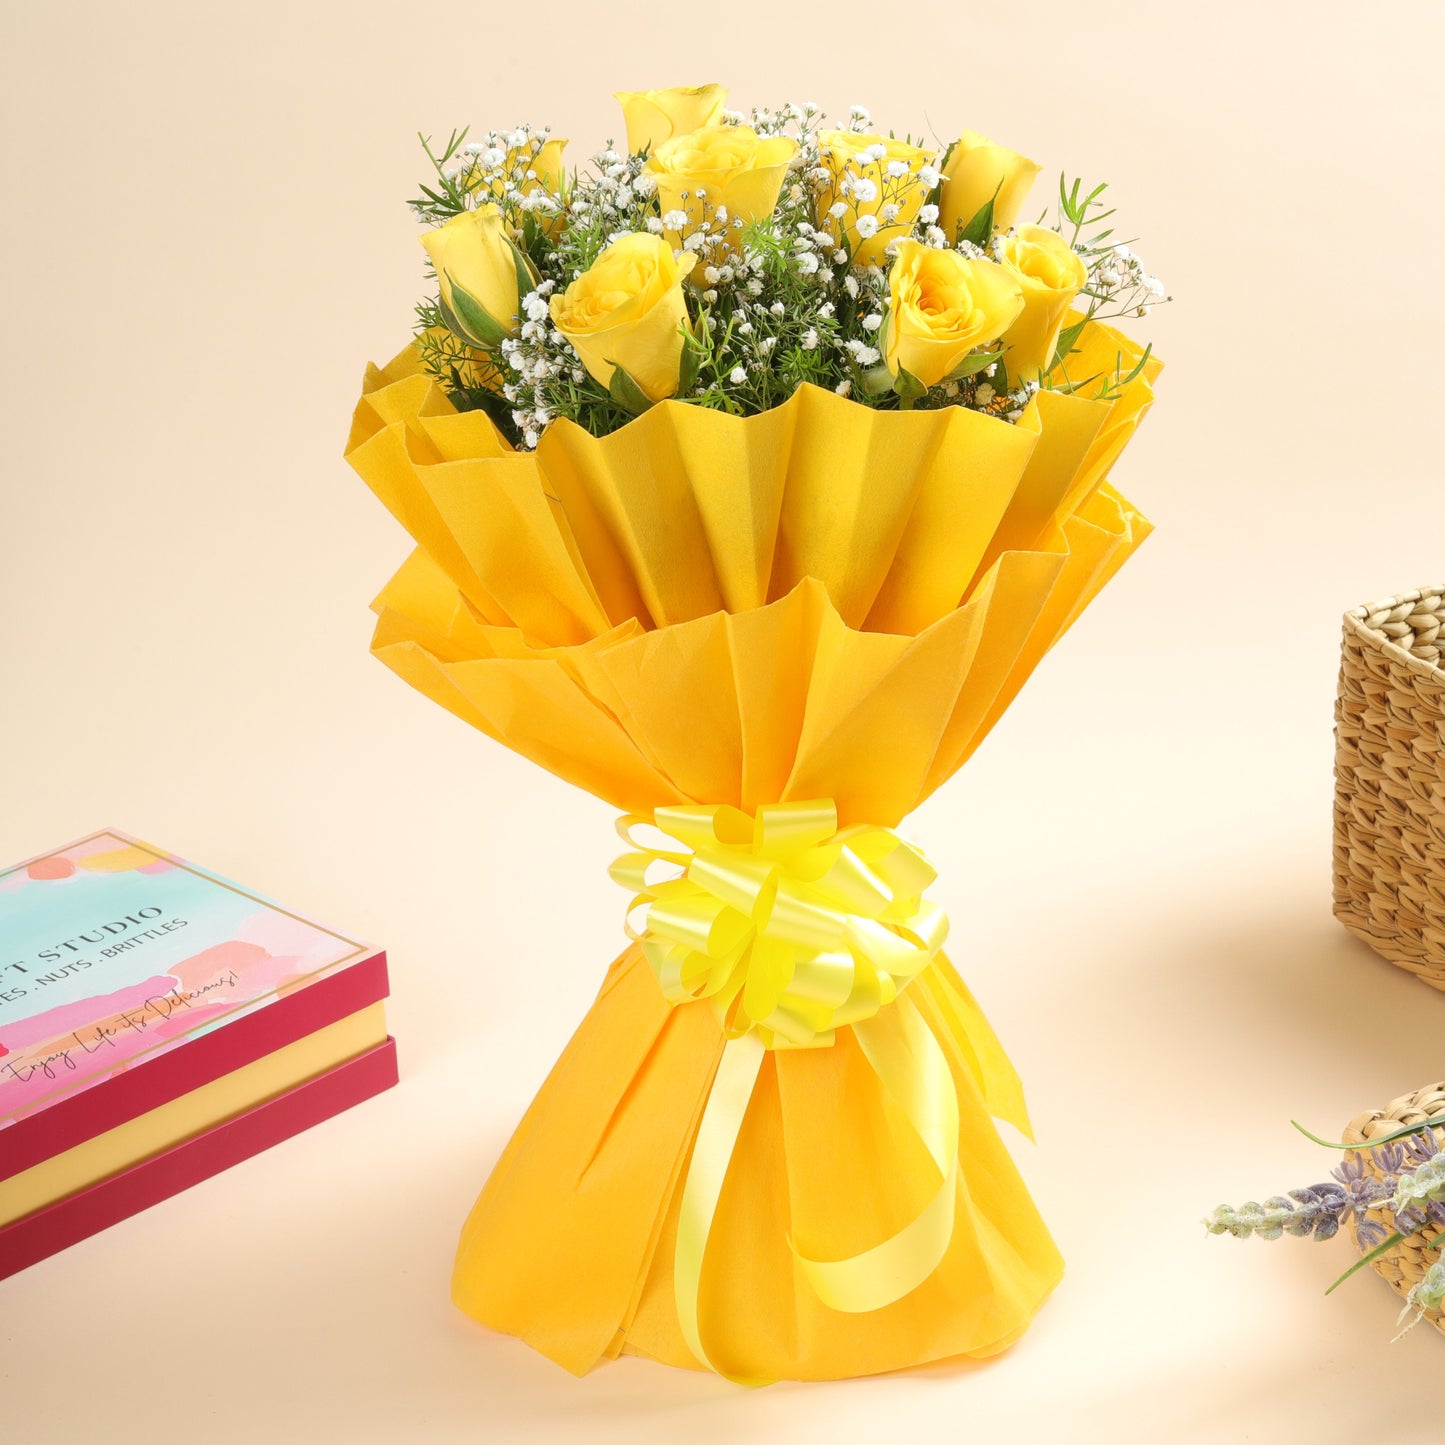 10 Yellow Roses Bouquet